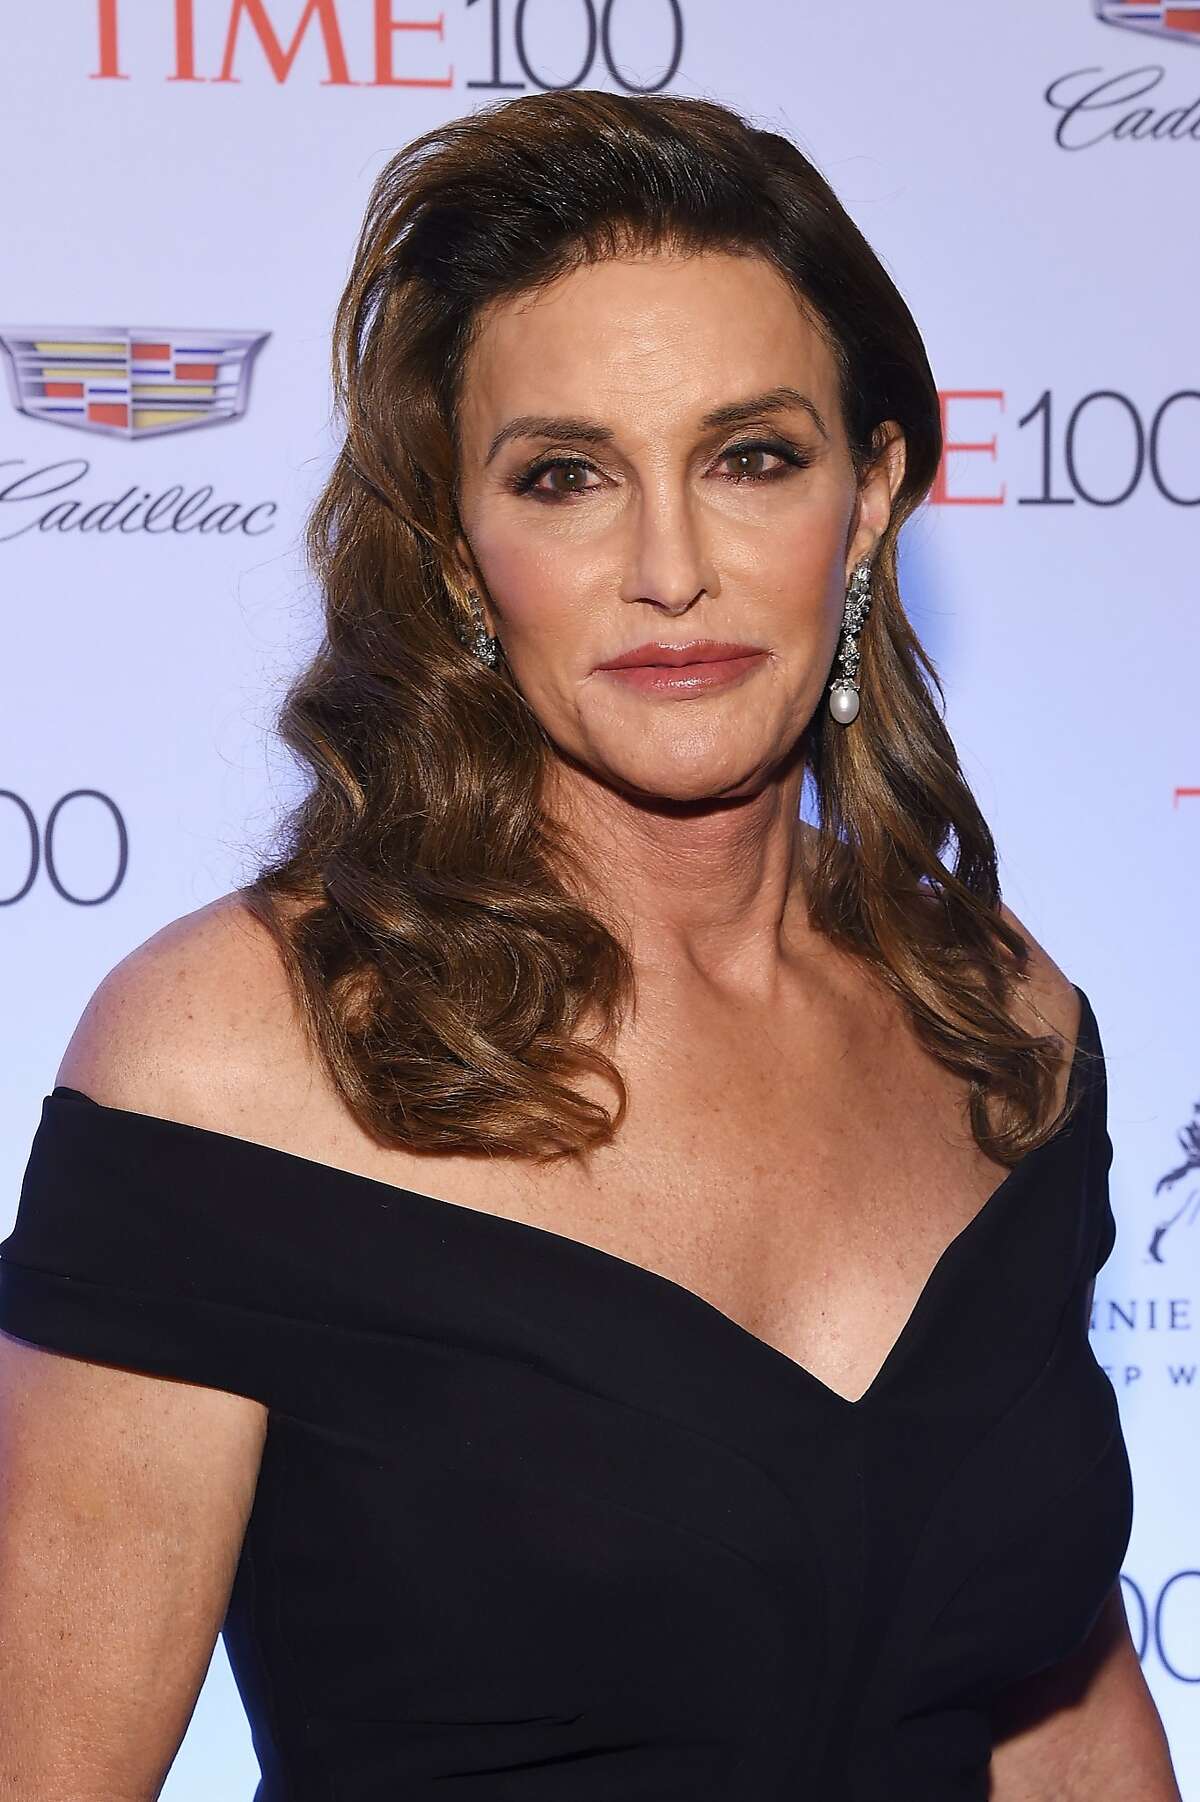 UPDATE Caitlyn Jenner's Malibu home just barely survived wildfire